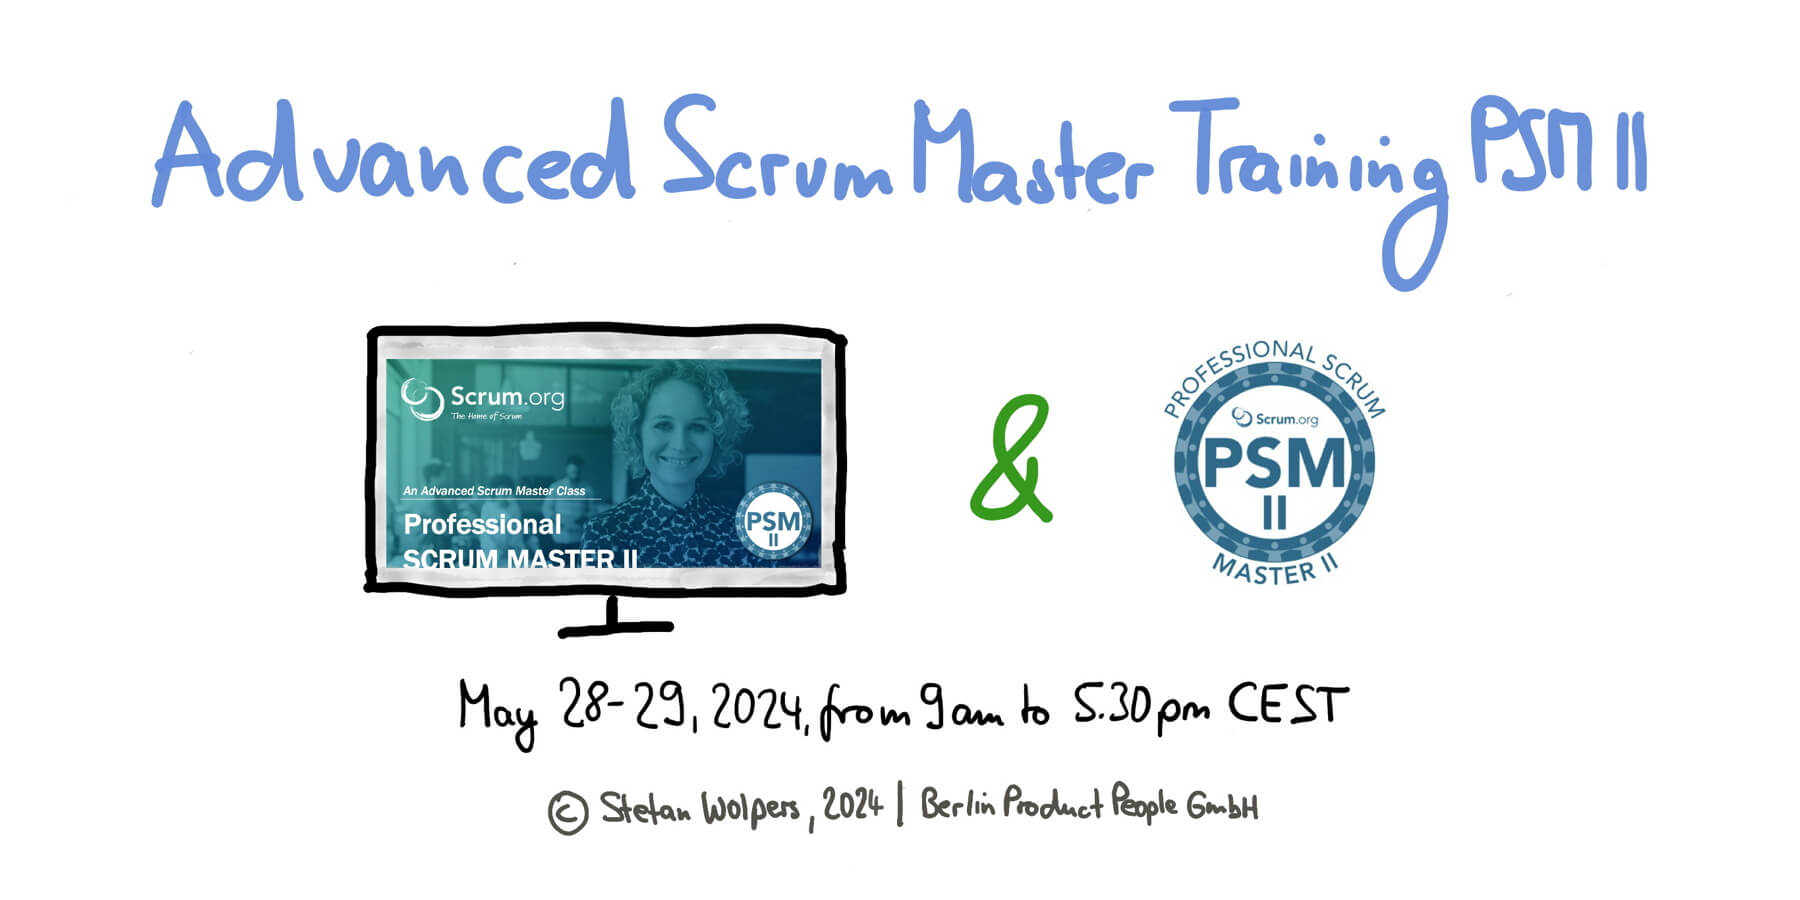 Advanced Professional Scrum Master Online Training w/ PSM II Certificate — May 28-29, 2024 — Berlin-Product-People.com